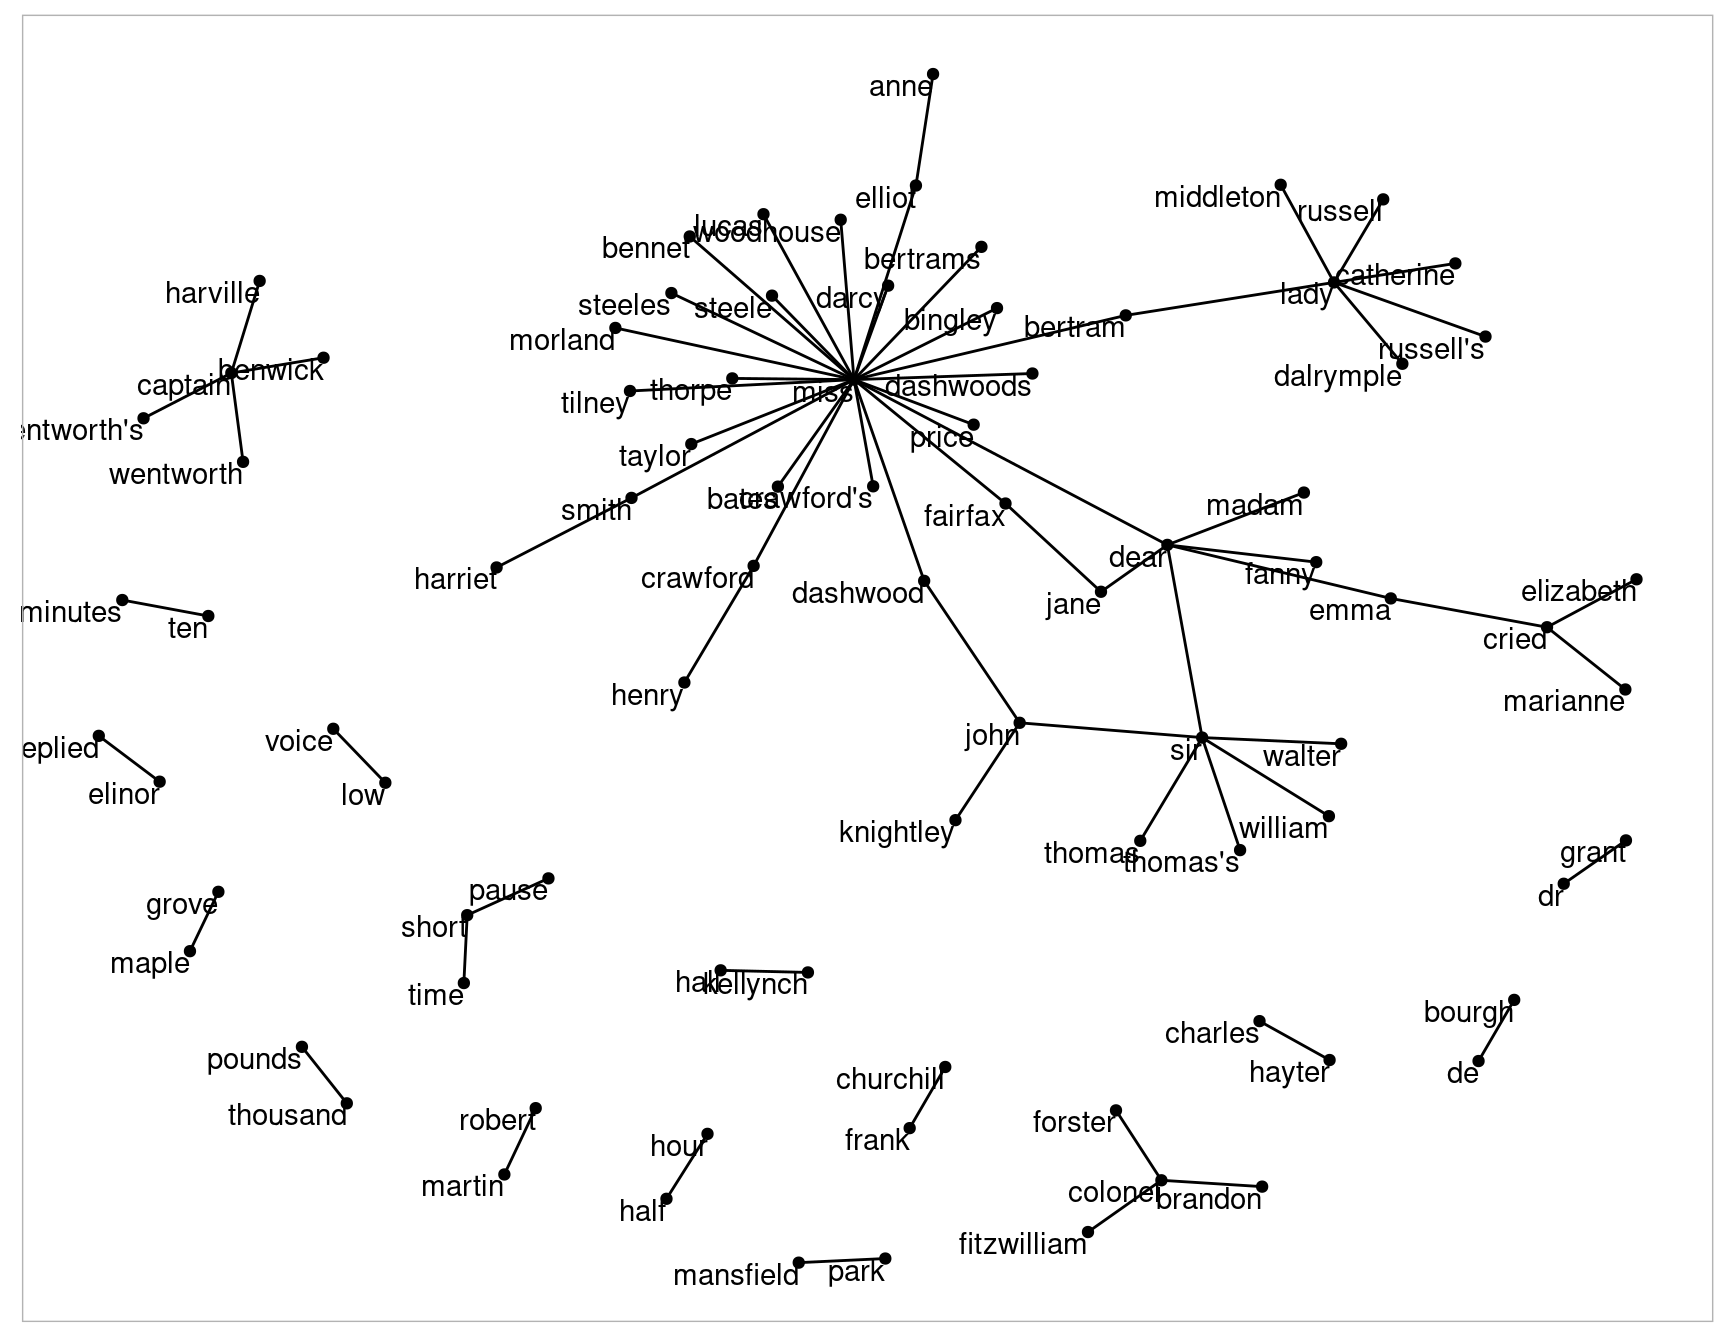 Common bigrams in Jane Austen's novels, showing those that occurred more than 20 times and where neither word was a stop word